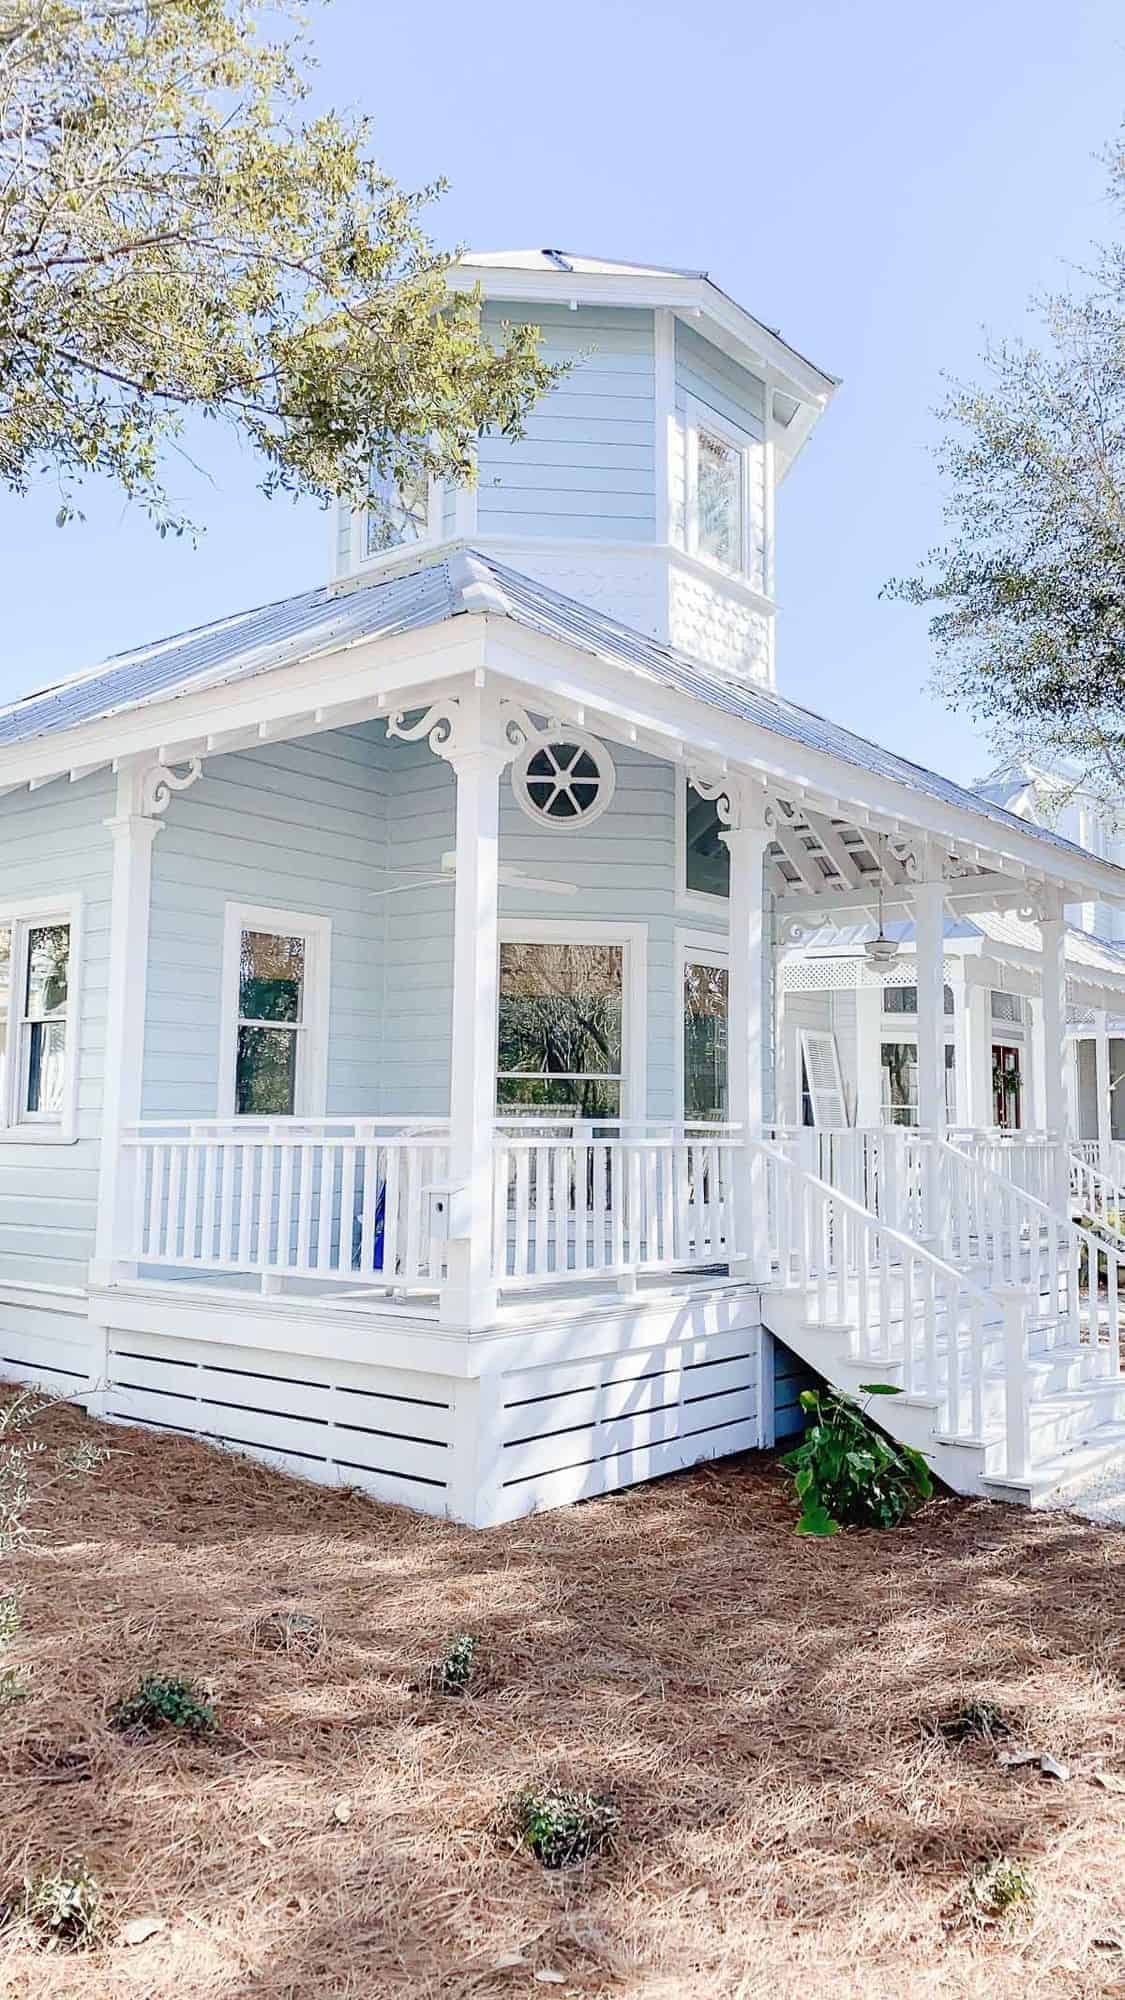 A charming pale blue beach house with a white front porch in Seaside Florida